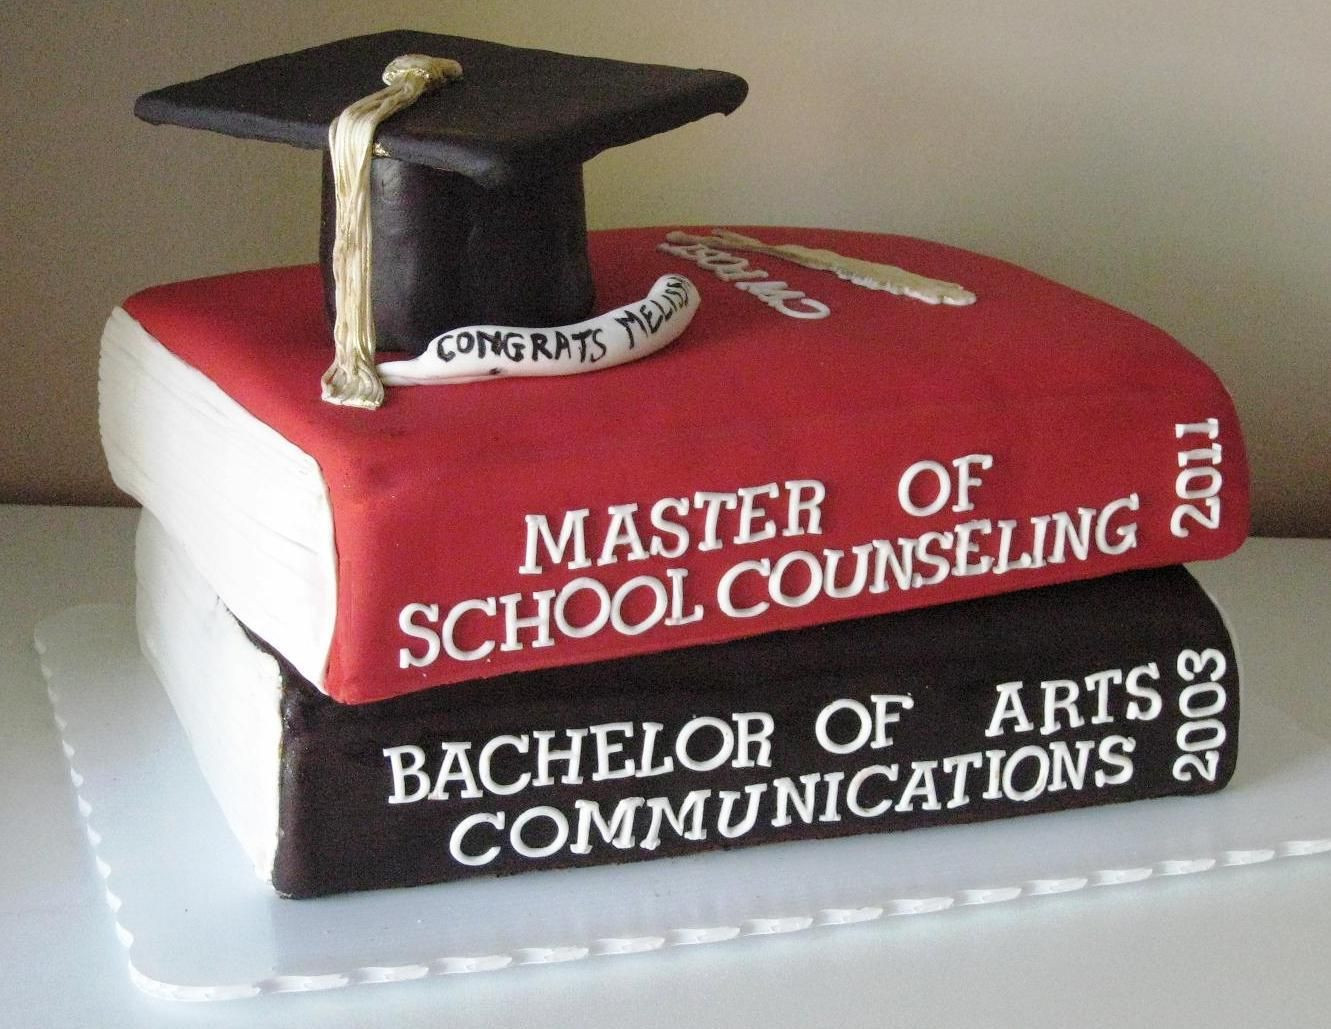 Masters Degree Graduation Gift Ideas
 Can someone make me one of these when I graduate